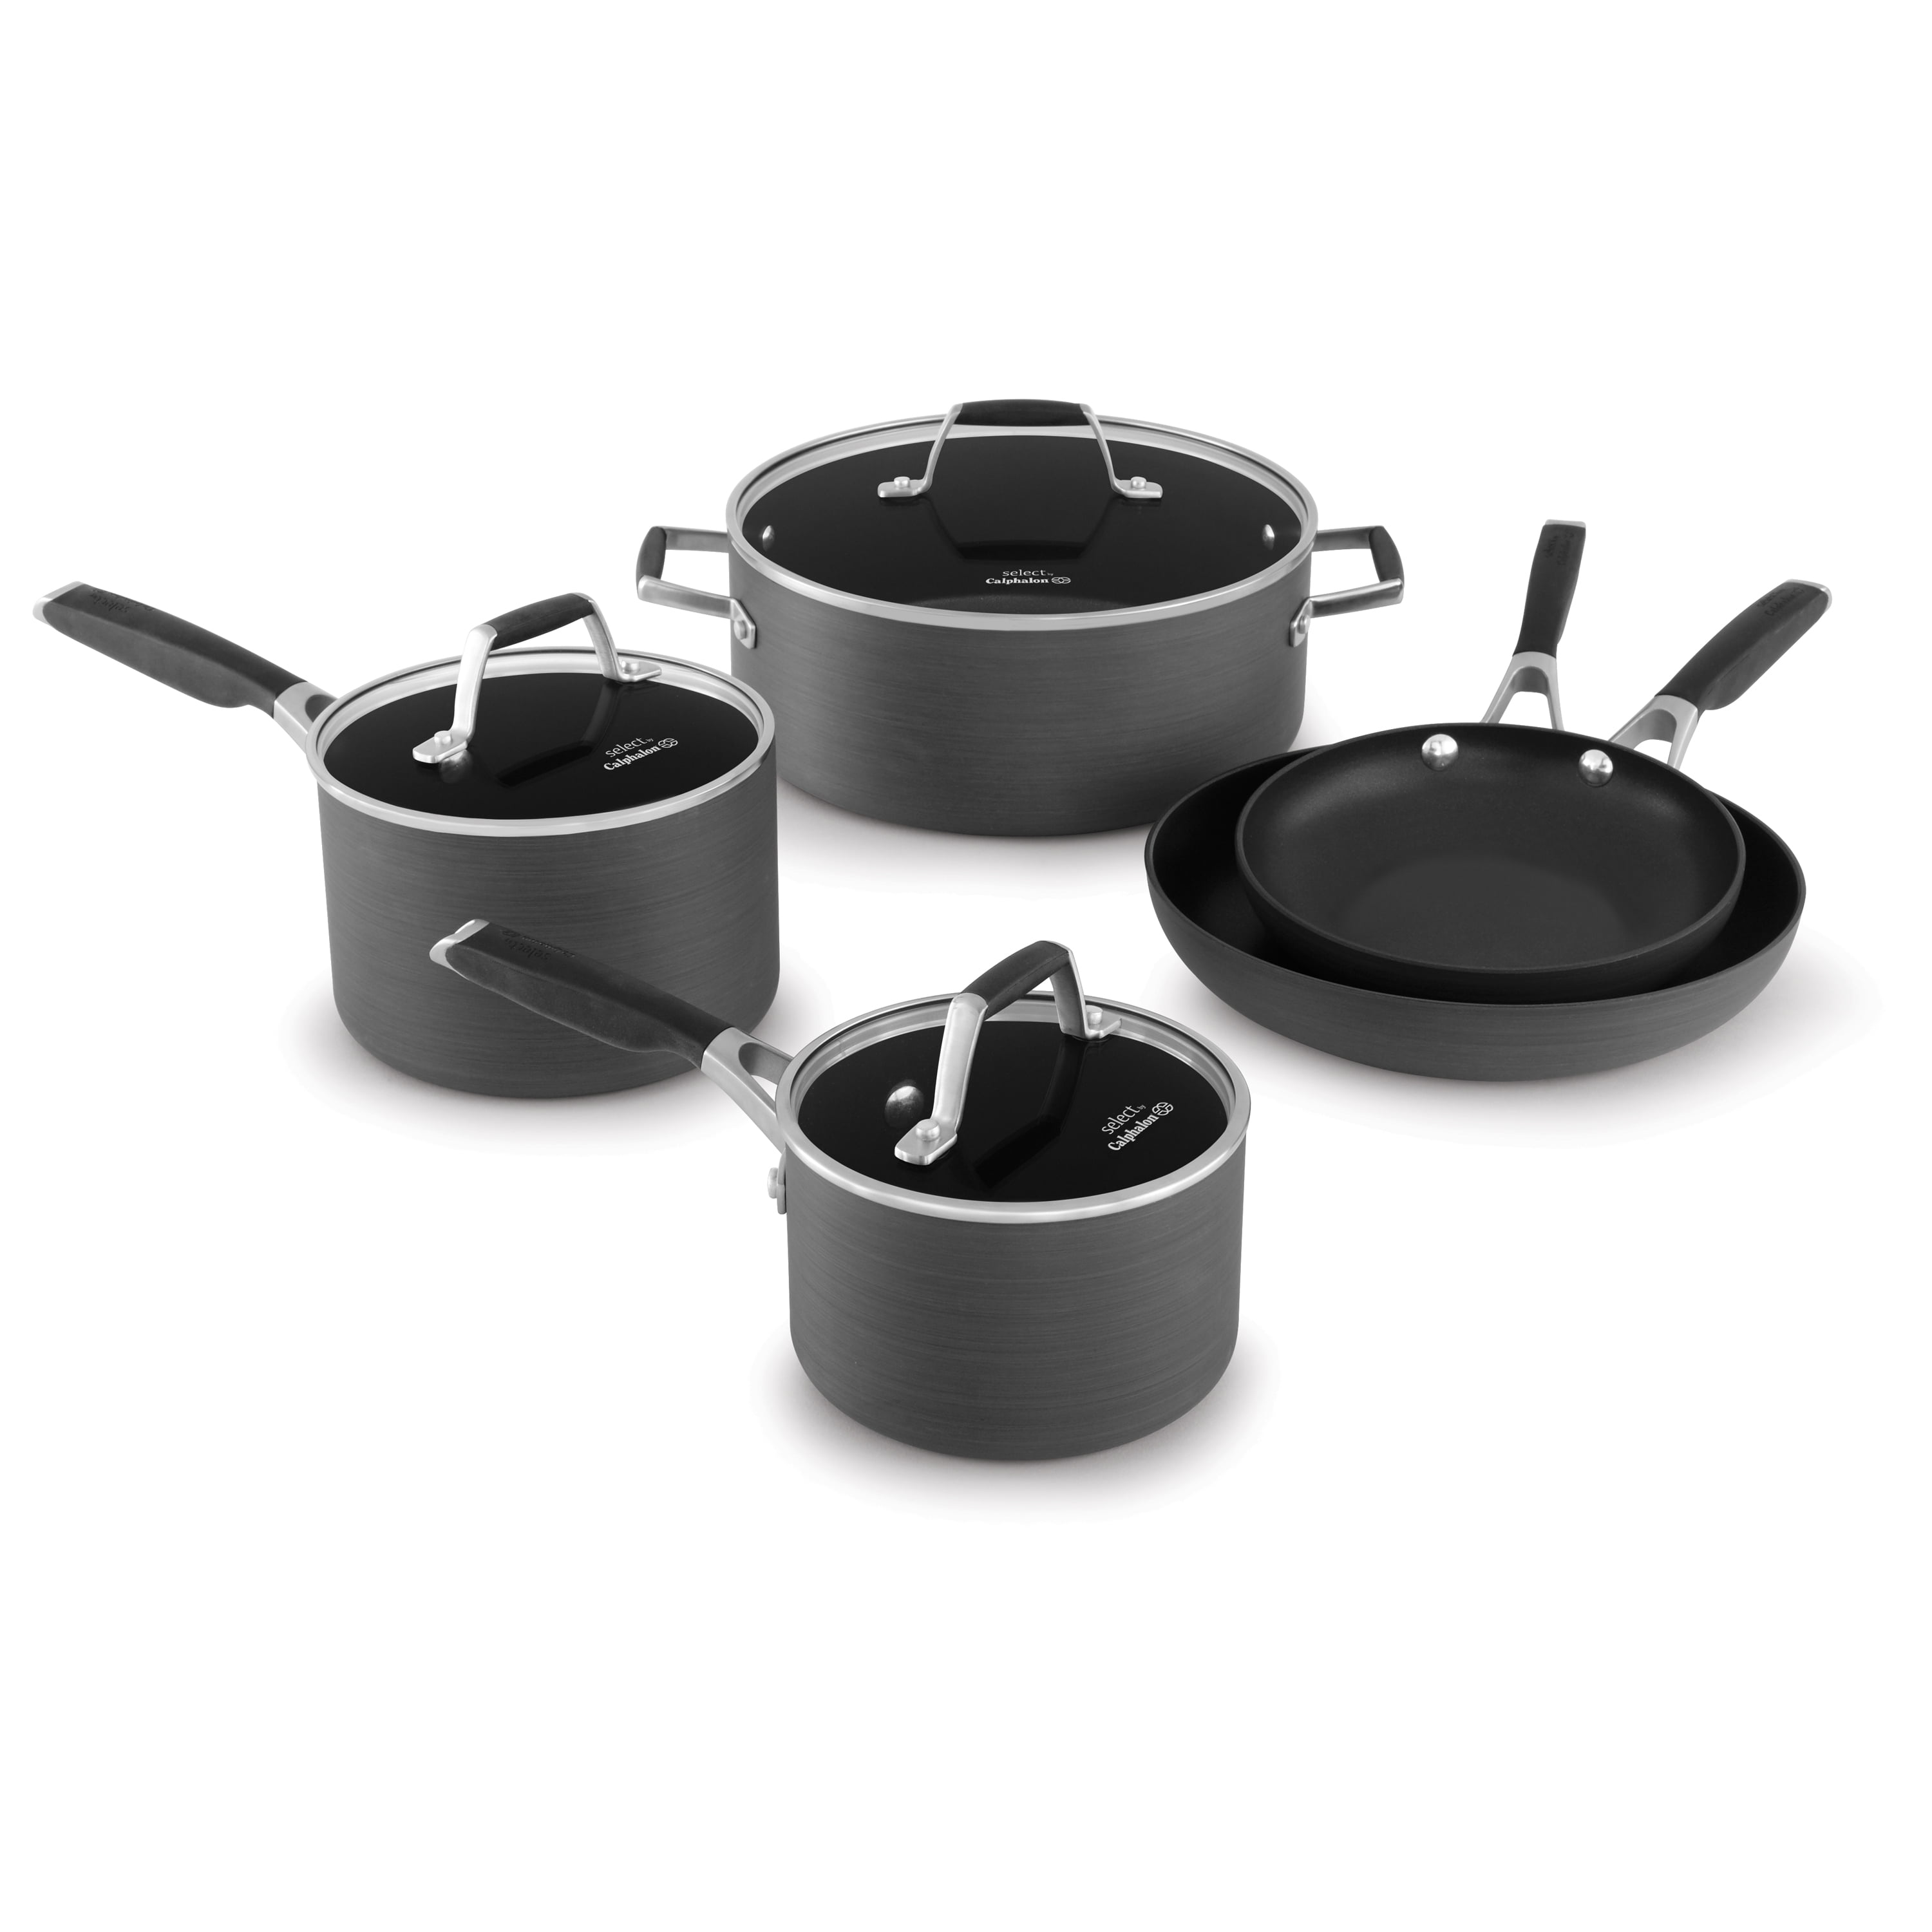 10-Piece Cookware Set Select by Calphalon Hard-Anodized Nonstick Pots and Pans 